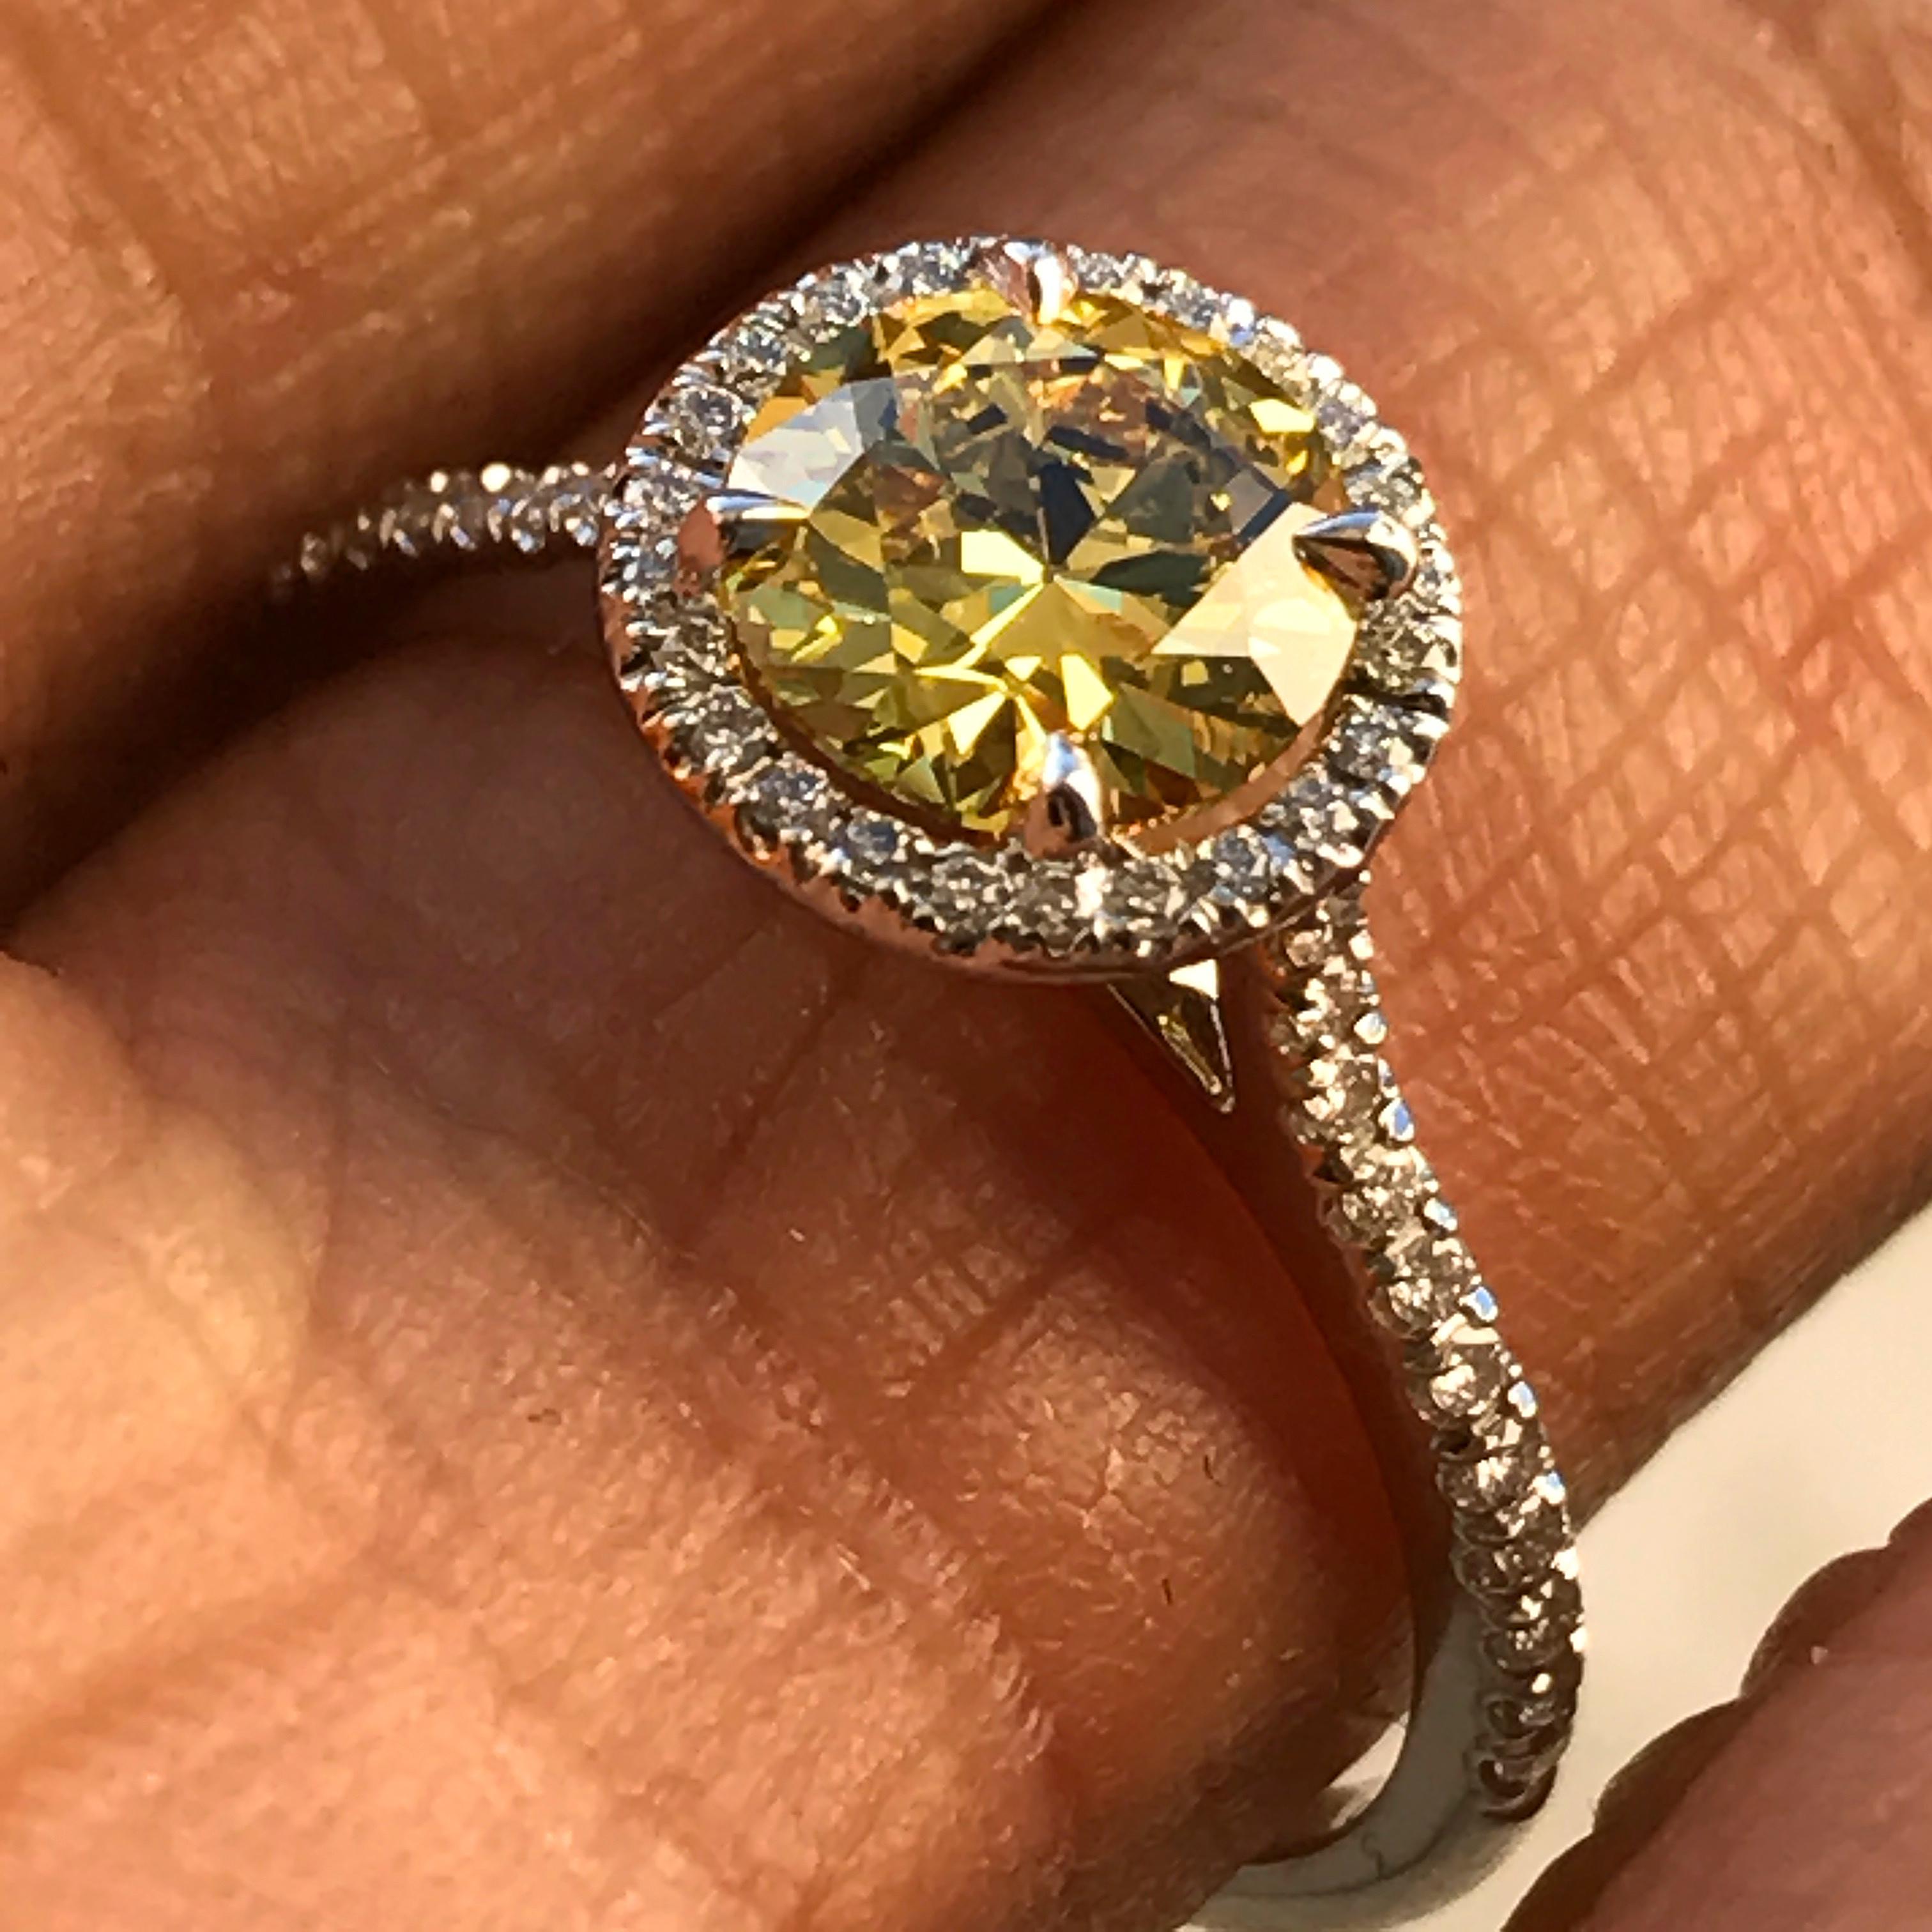 1.3 Carat TW Fancy Intense Yellow GIA Diamond Halo Engagement Ring.

Such an amazing yellow and saturation.

Ring May be made to order from scratch to accommodate your exact finger size 
or a different stone if the budget requires it, takes